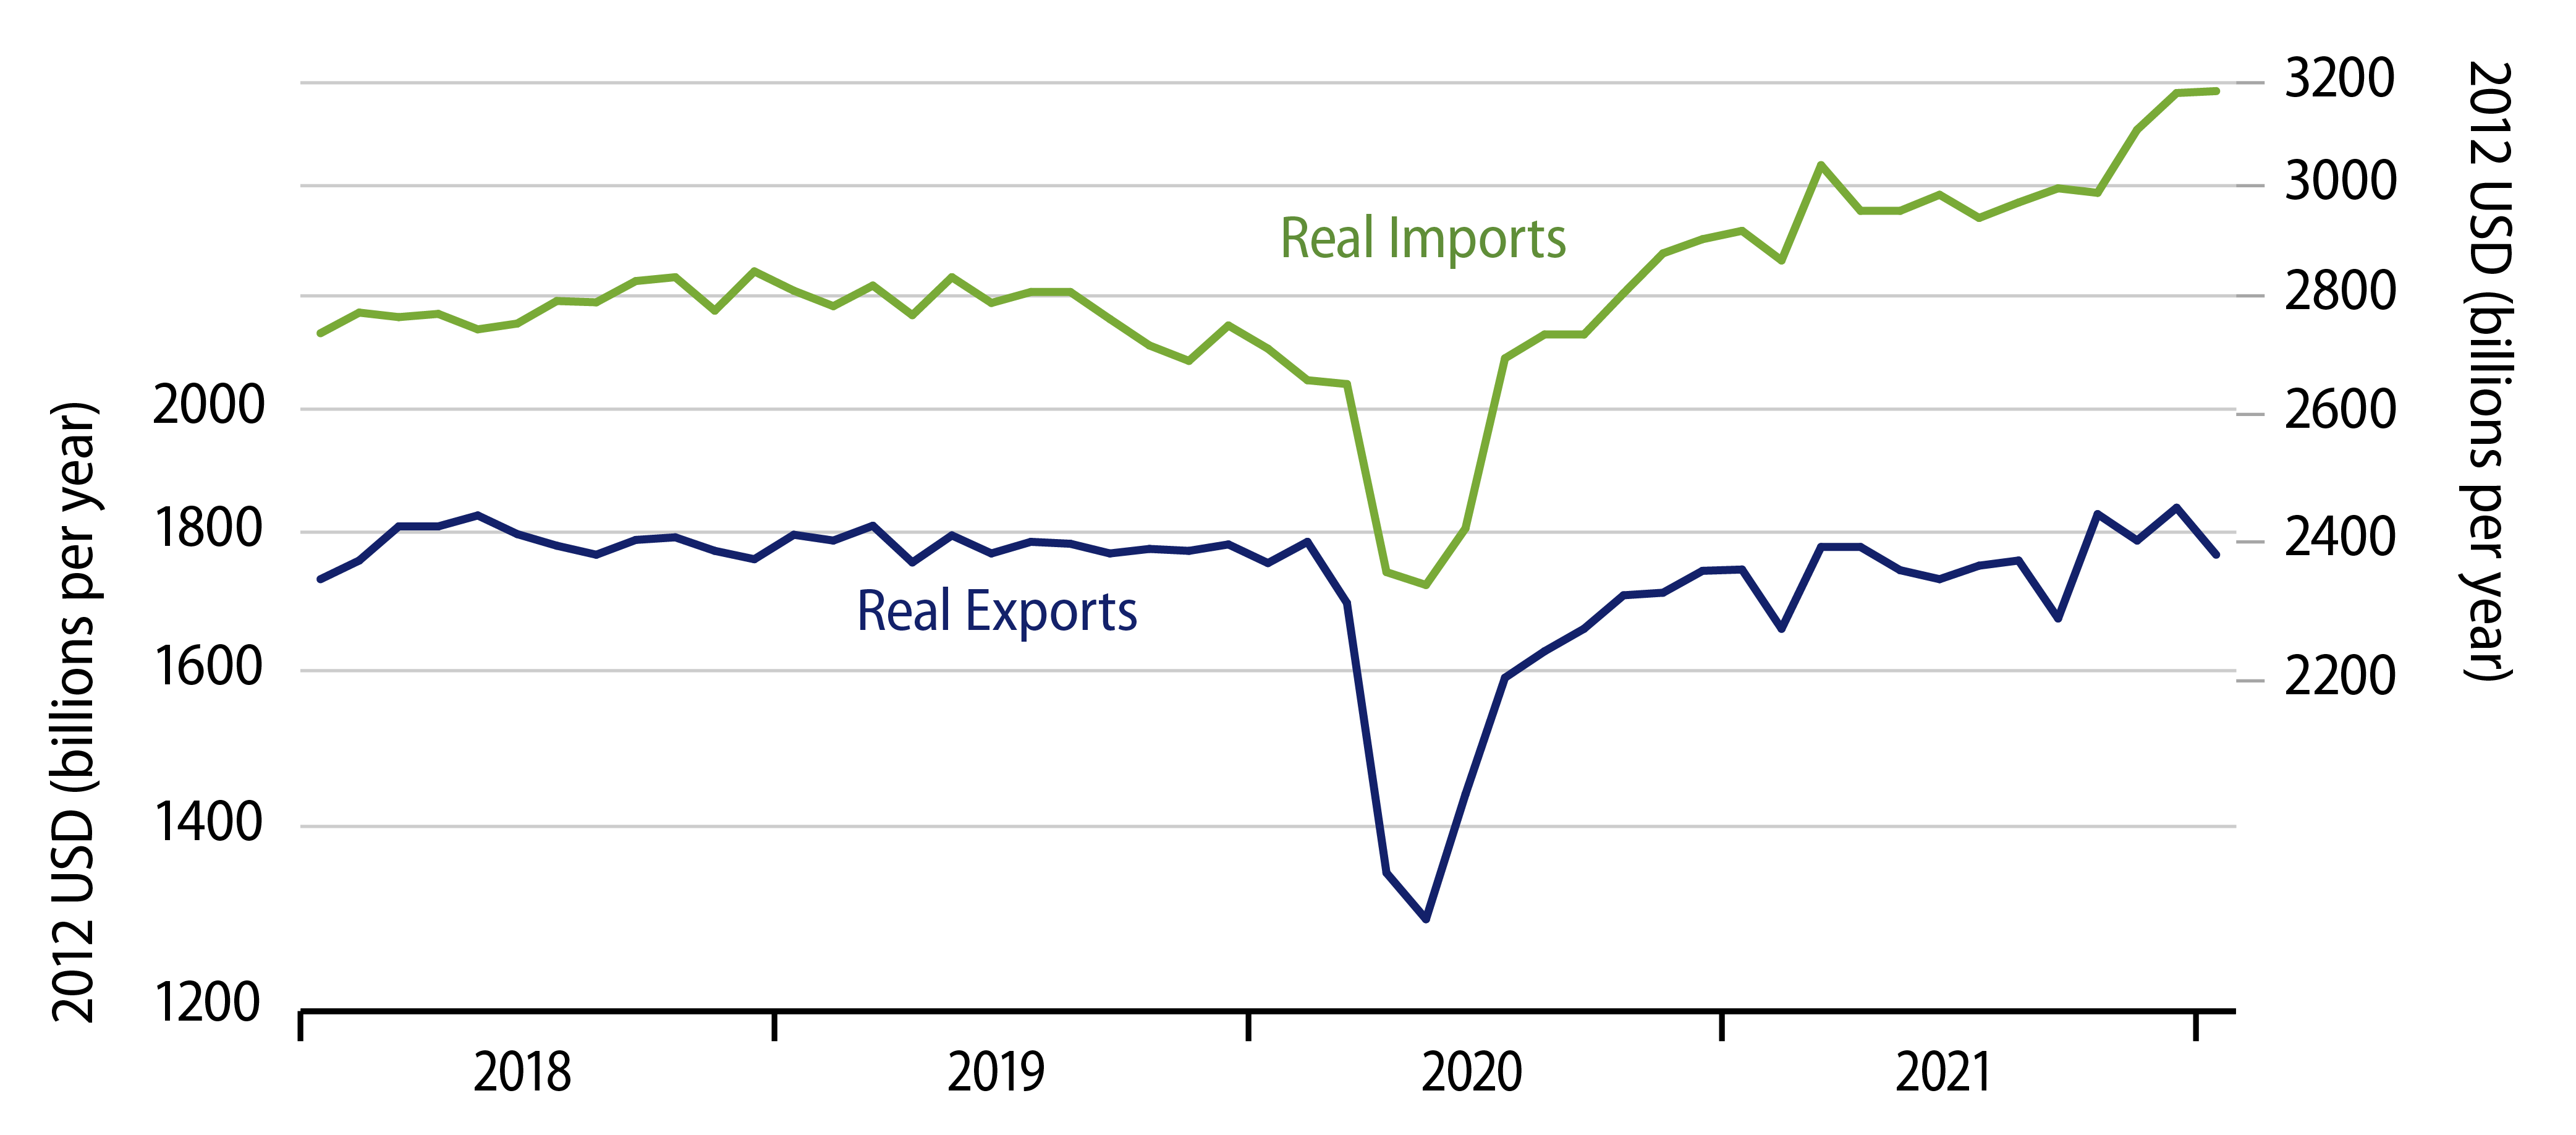 Real Exports and Imports of Goods